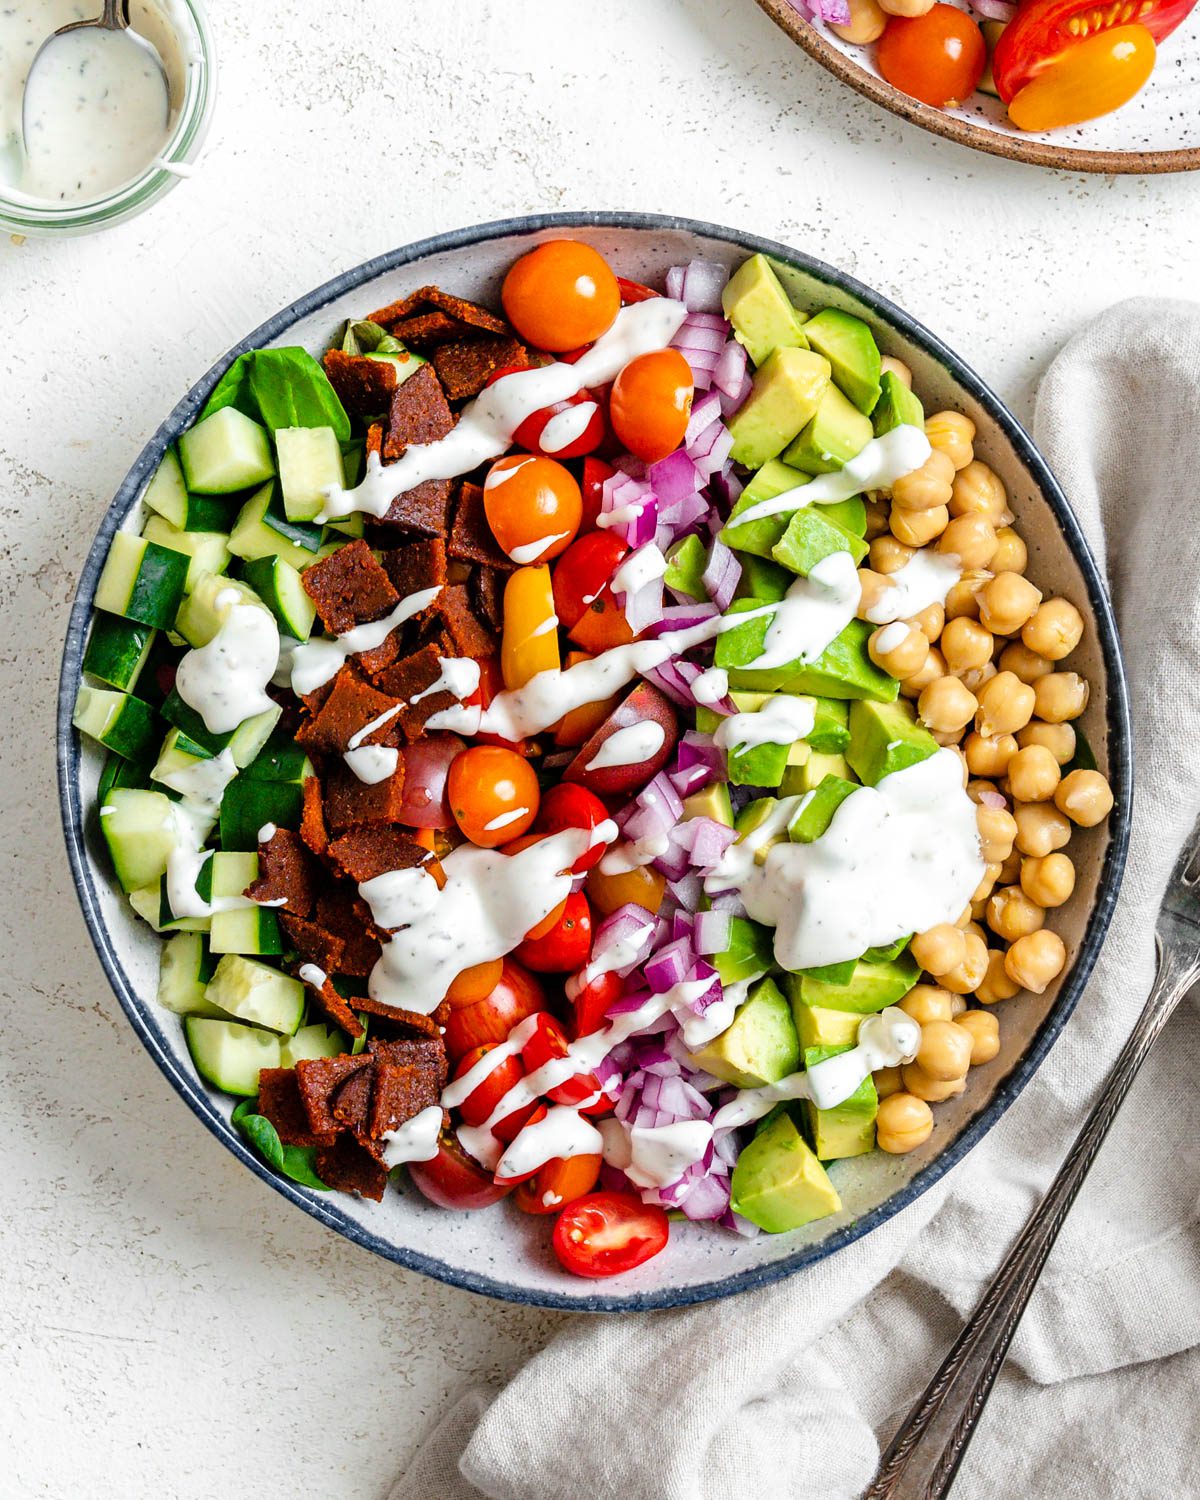 completed Vegan Cobb Salad against a light surface